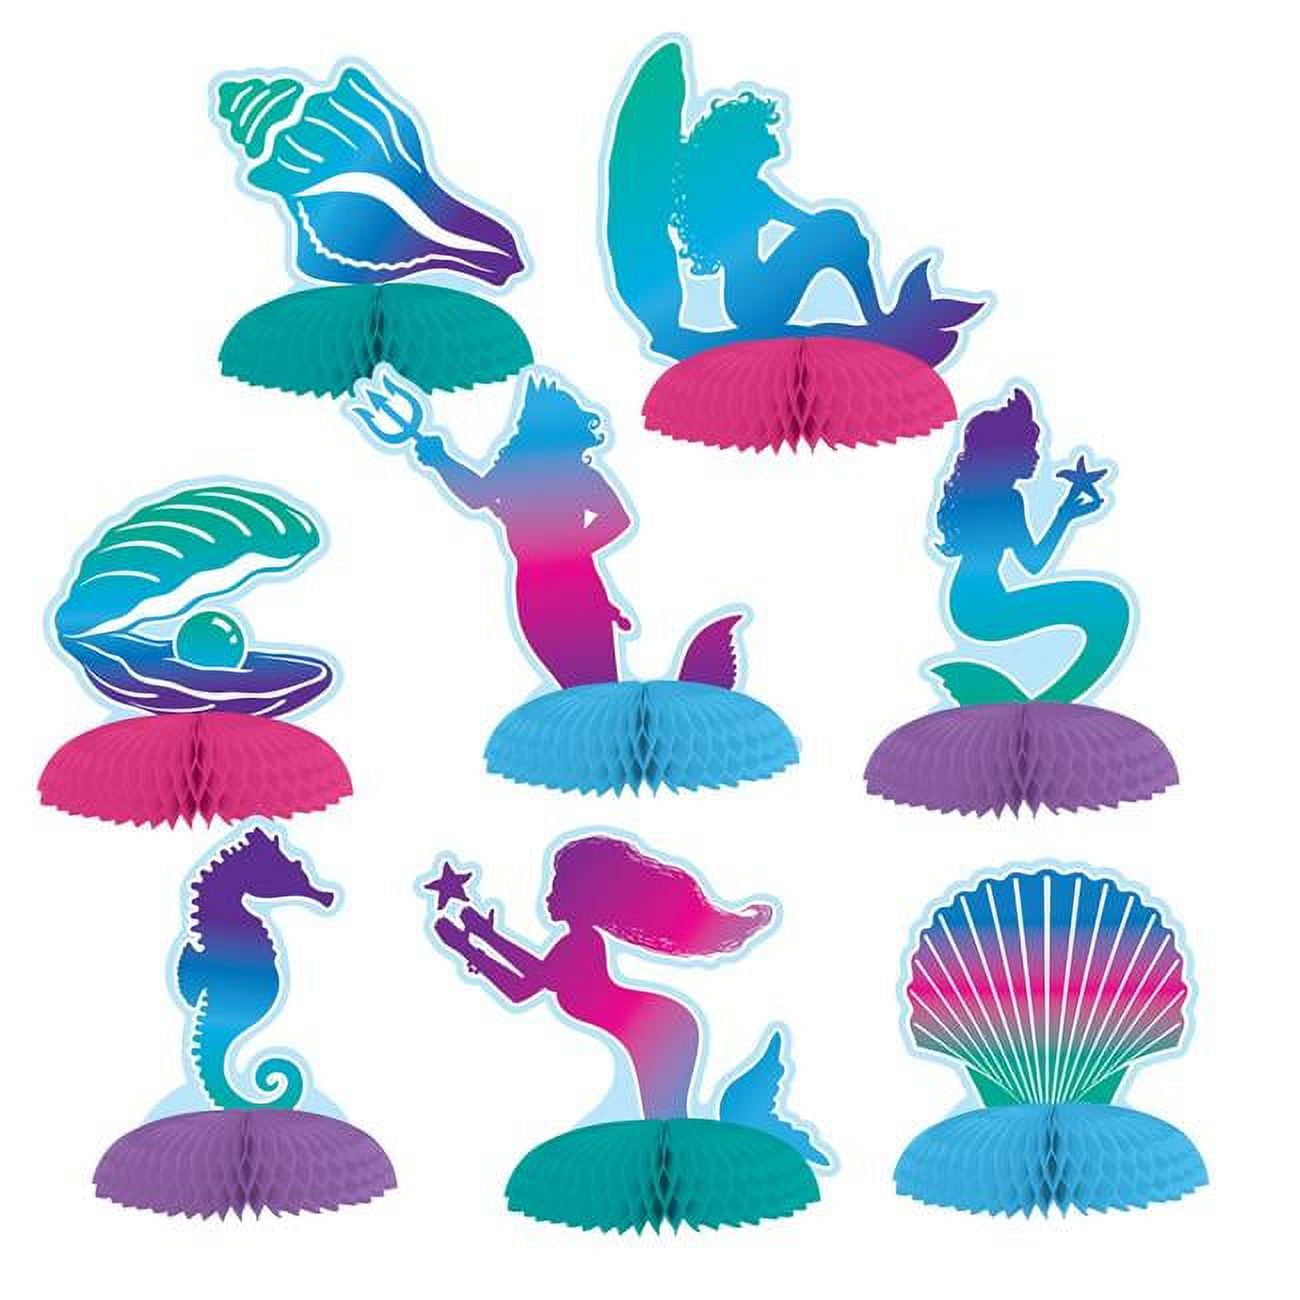 Picture of Beistle 53415 3.5 to 4.75 in. Mermaid Mini Centerpieces - Pack of 12